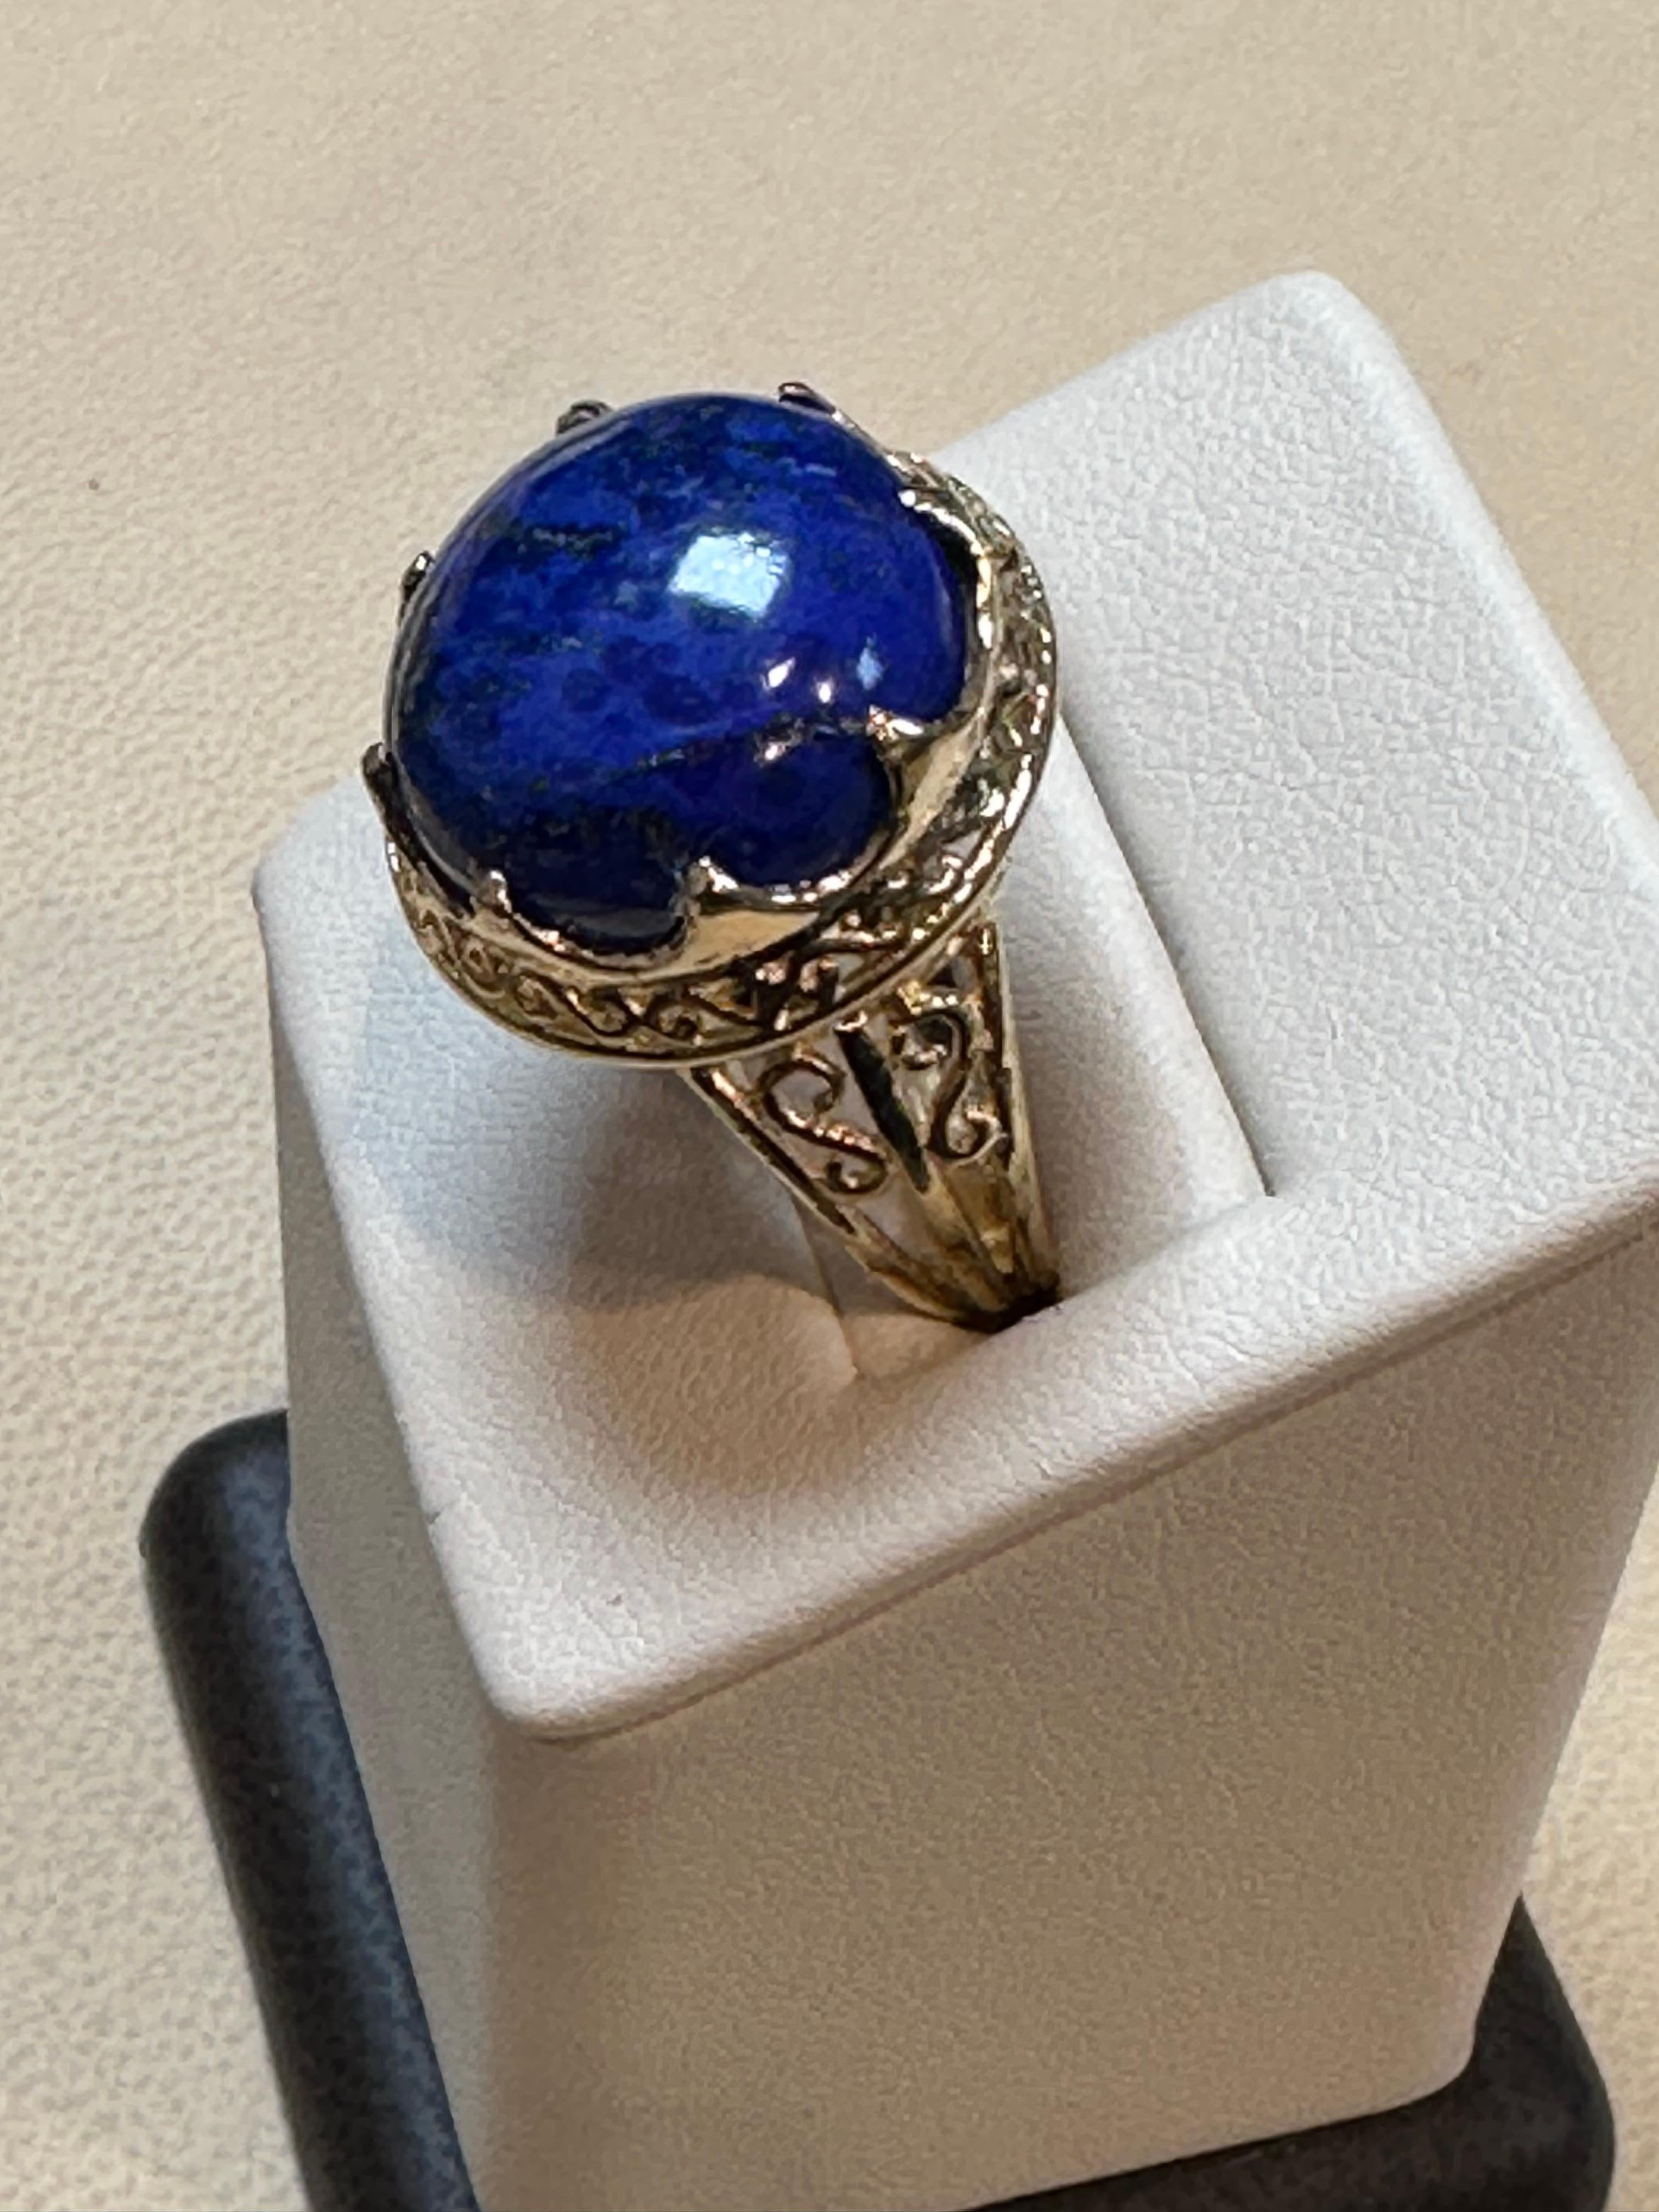 18 Ct Round Natural Cabochon Lapis Lazuli Ring in 14 Kt Yellow Gold, Estate In Excellent Condition For Sale In New York, NY